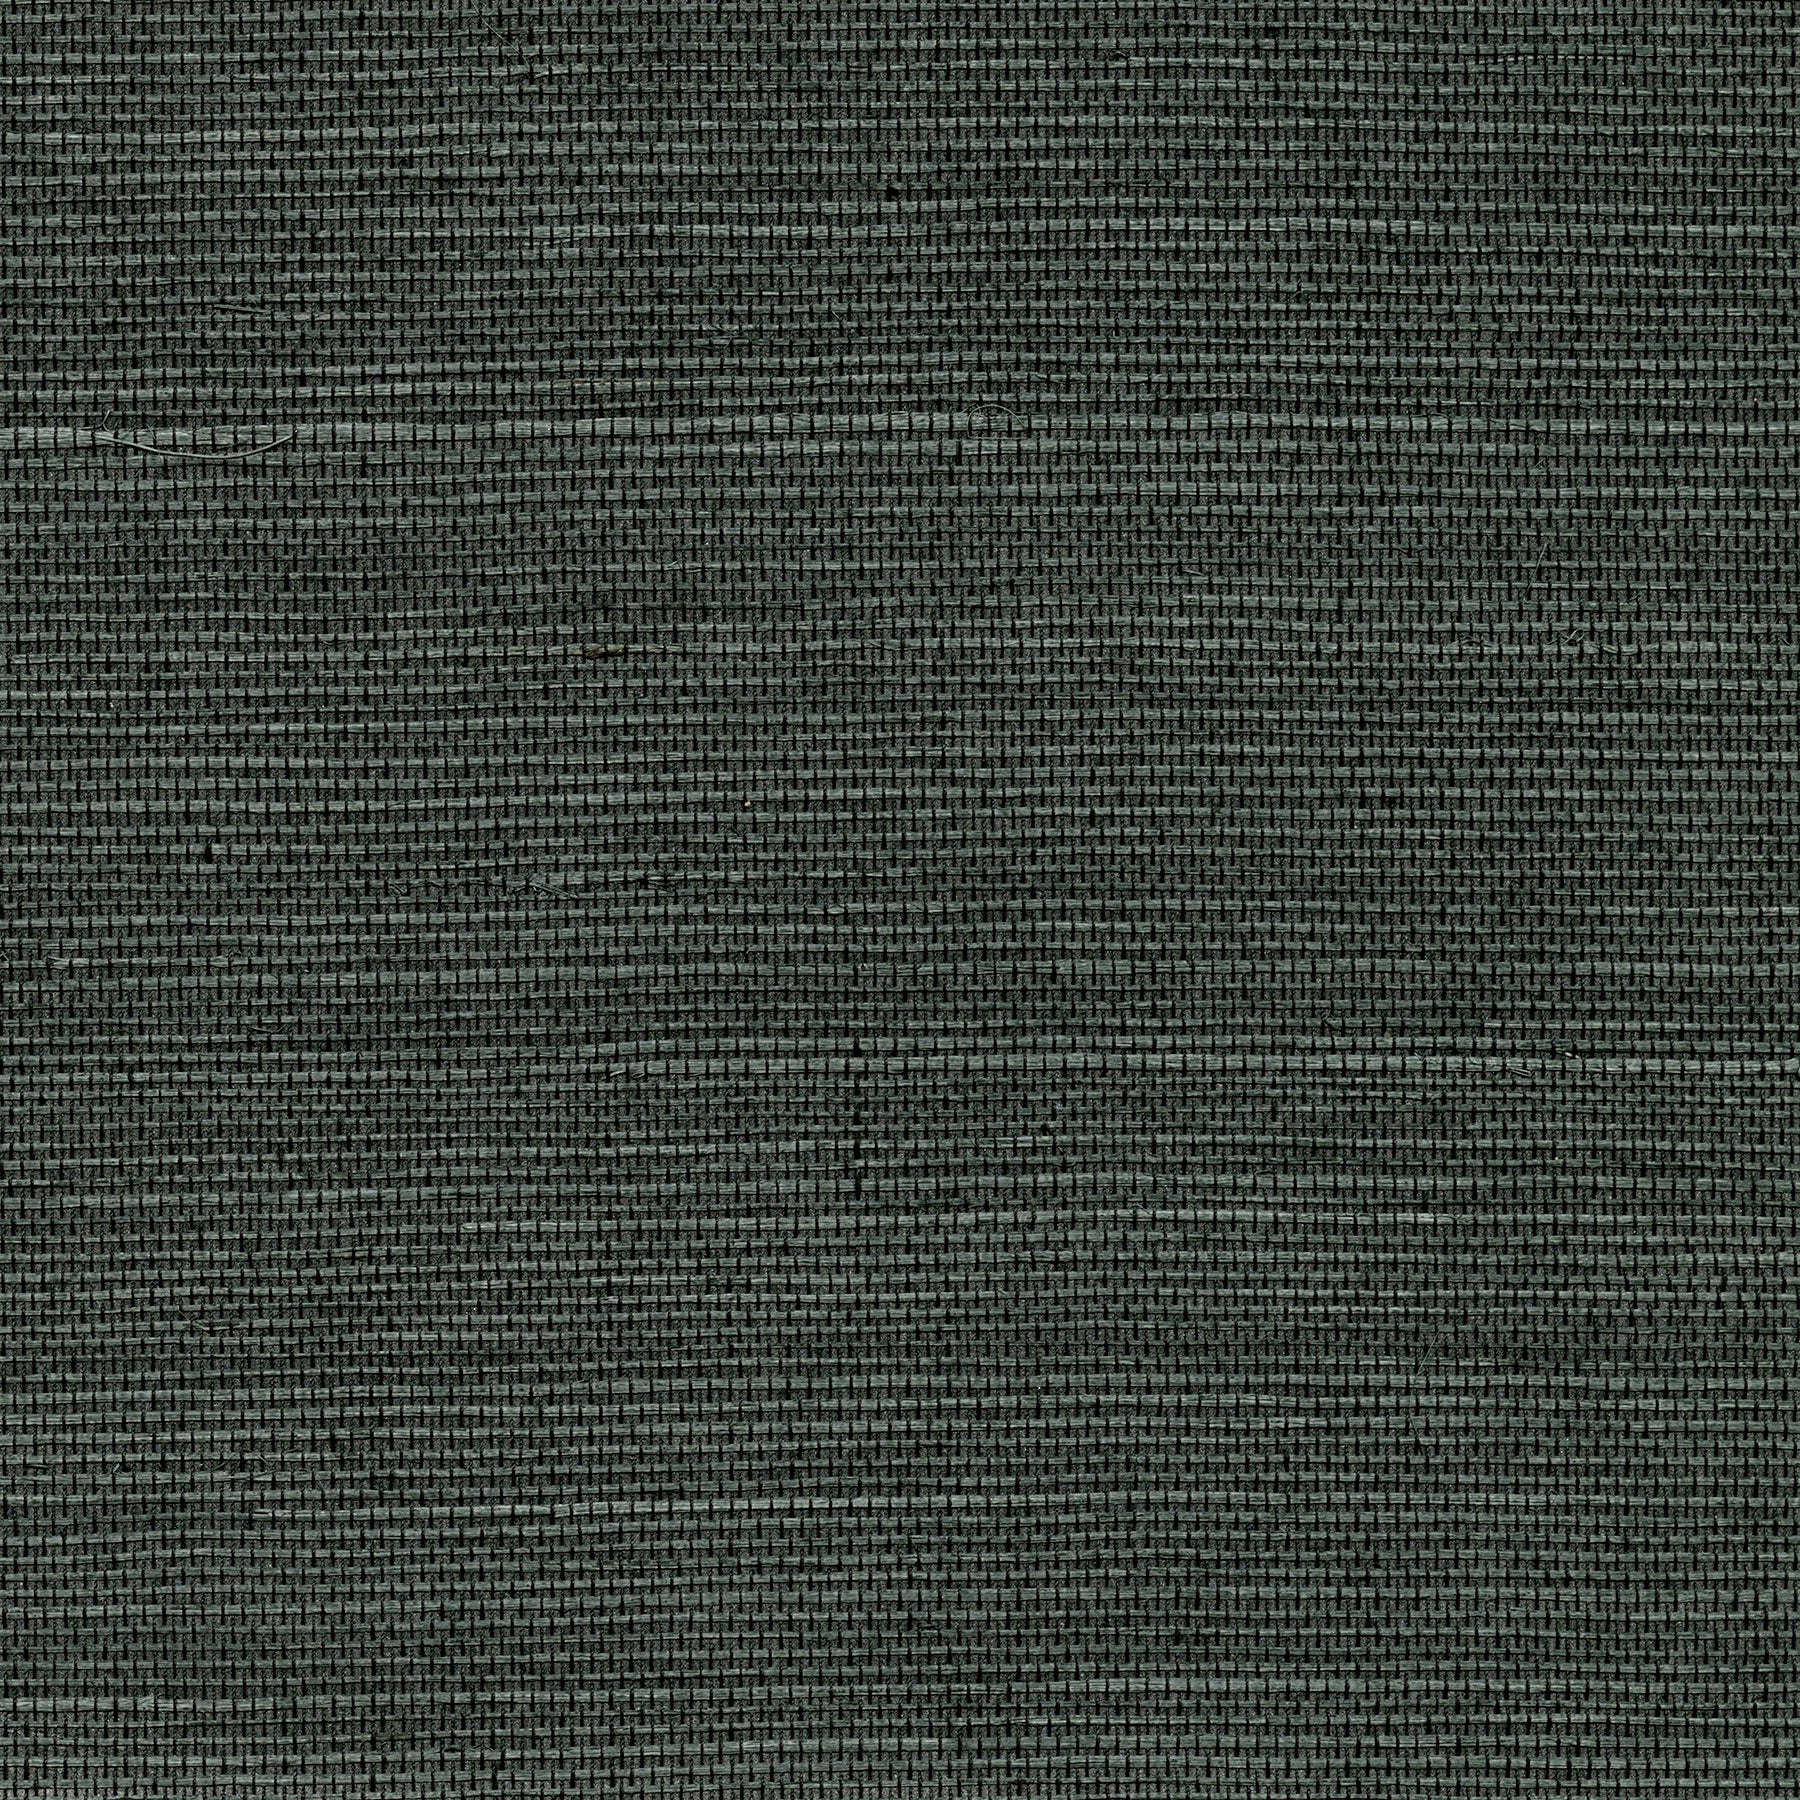 View 4018-0033 Grasscloth Portfolio Kowloon Charcoal Sisal Grasscloth Charcoal by Advantage